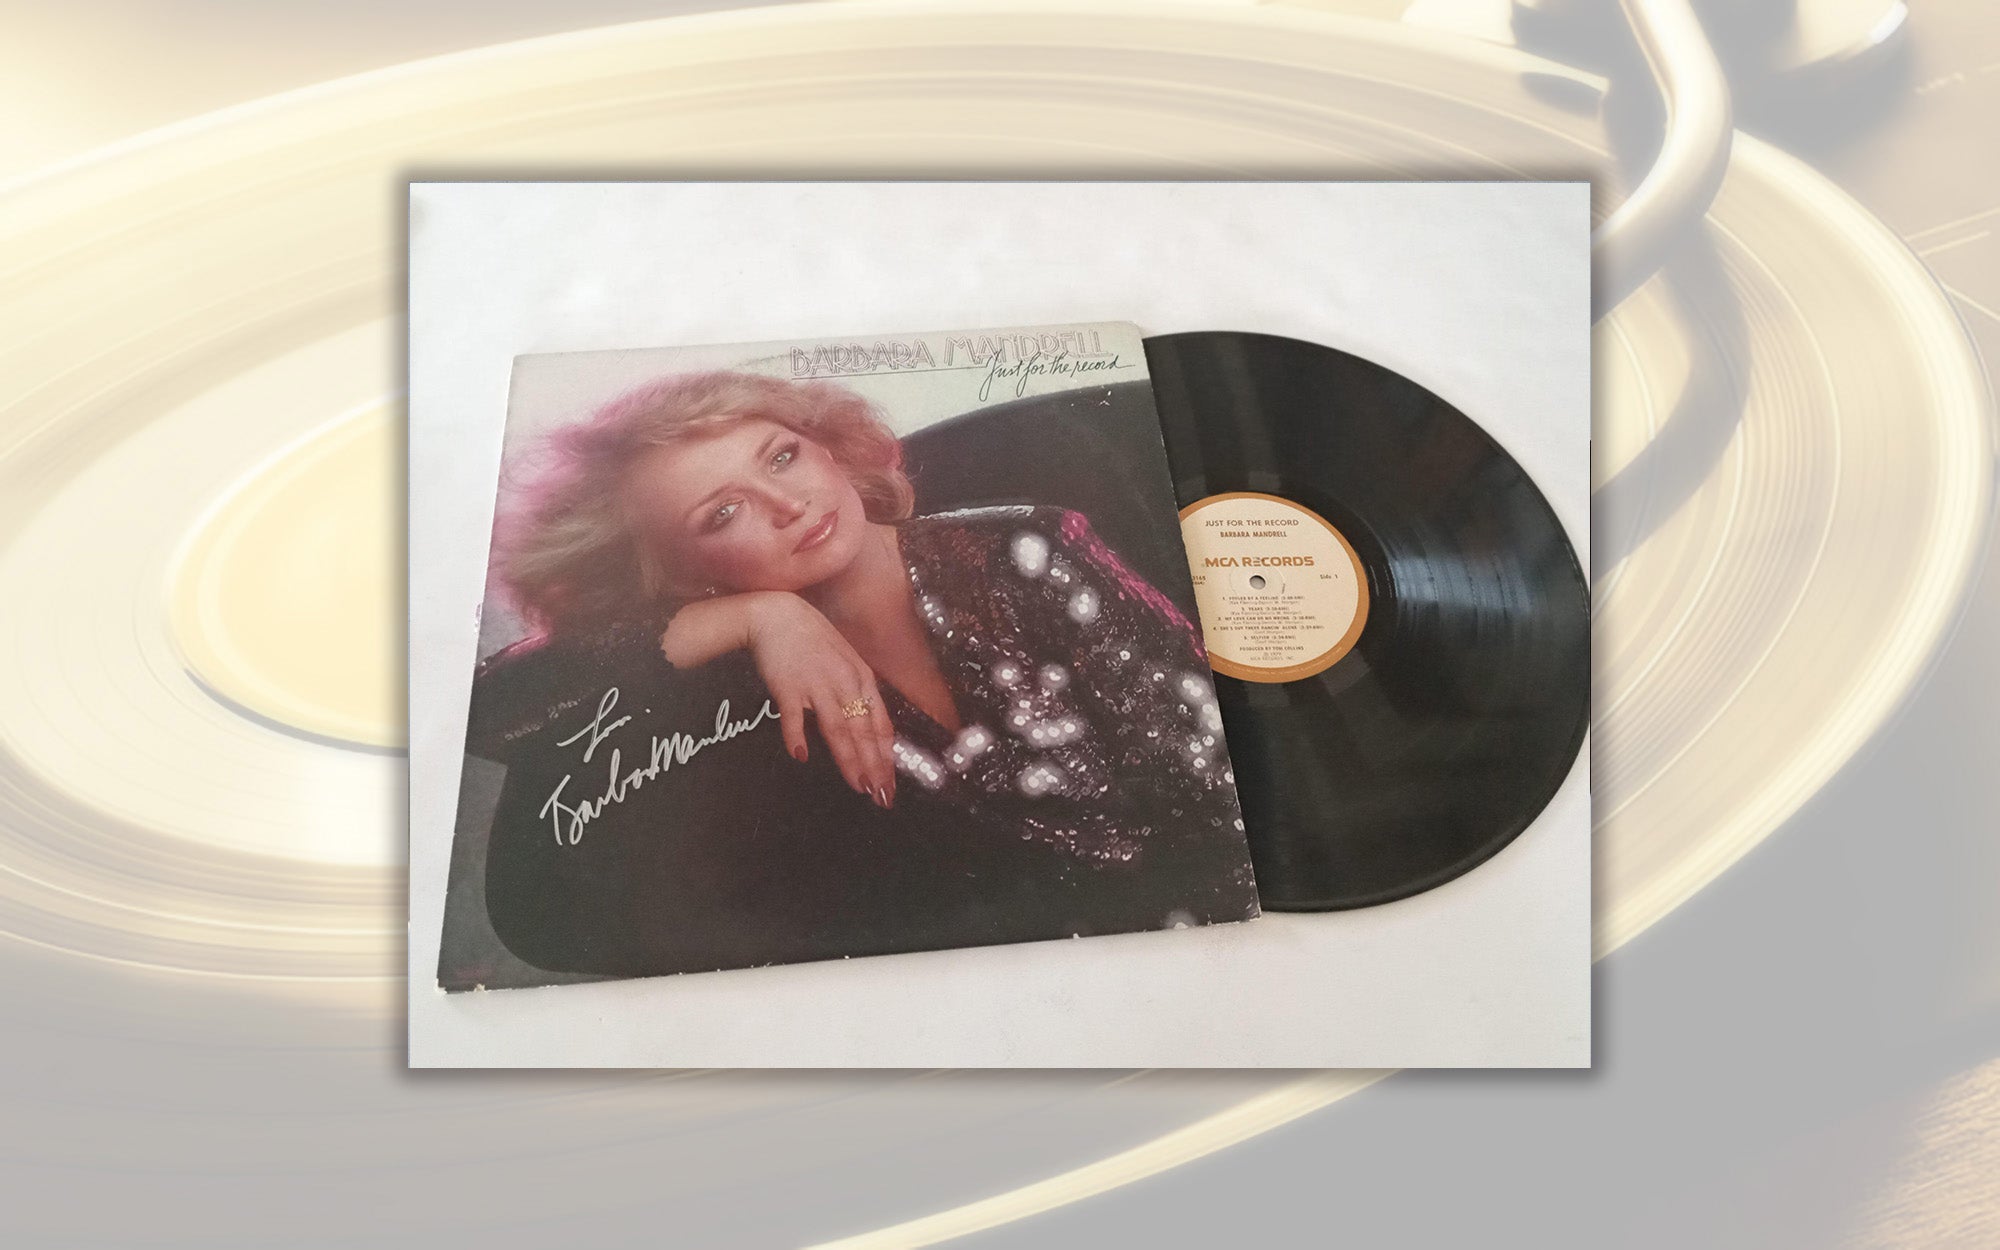 Barbara Mandrell "Just for the Record" LP signed with proof